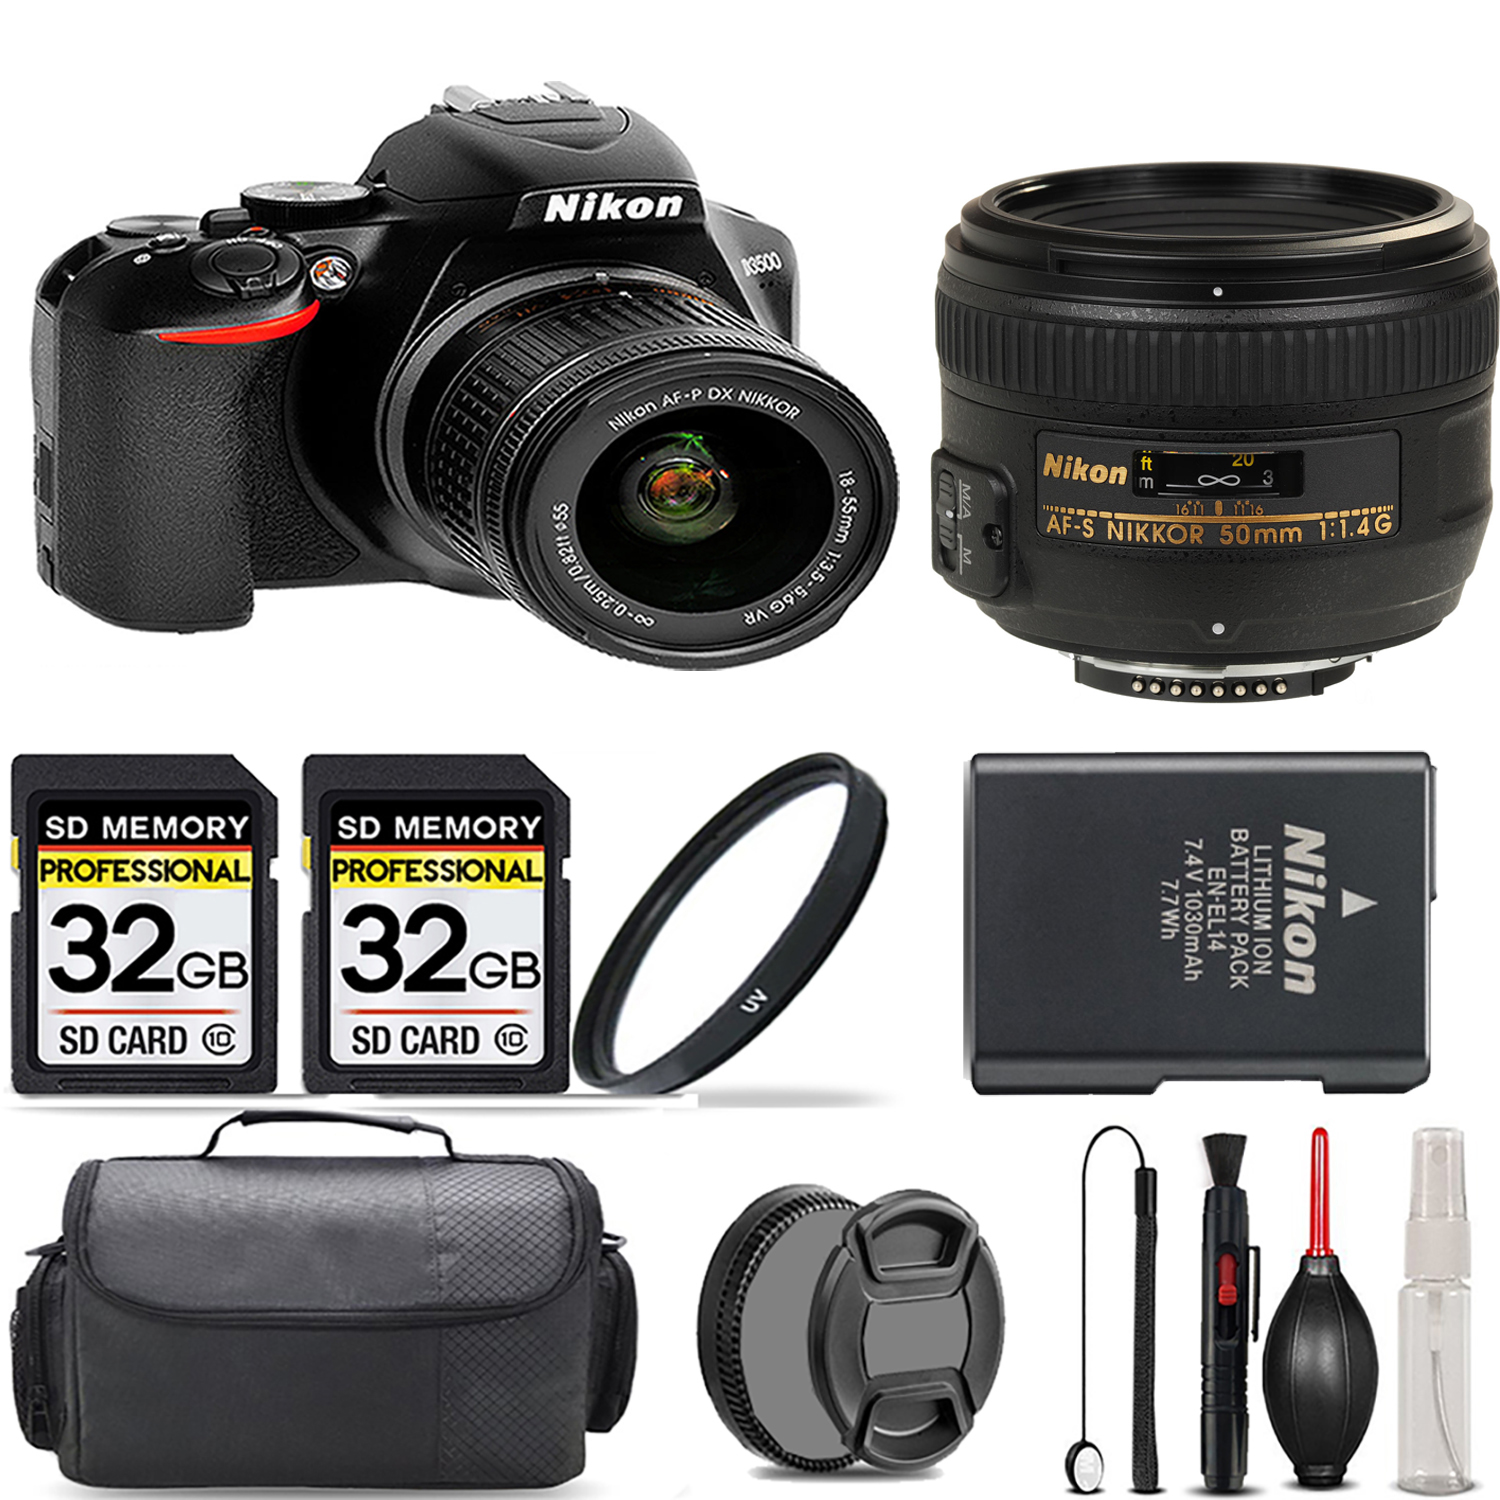 D3500 Camera with 18-55mm Lens + 50mm Lens + UV Filter + 64GB  & More! *FREE SHIPPING*